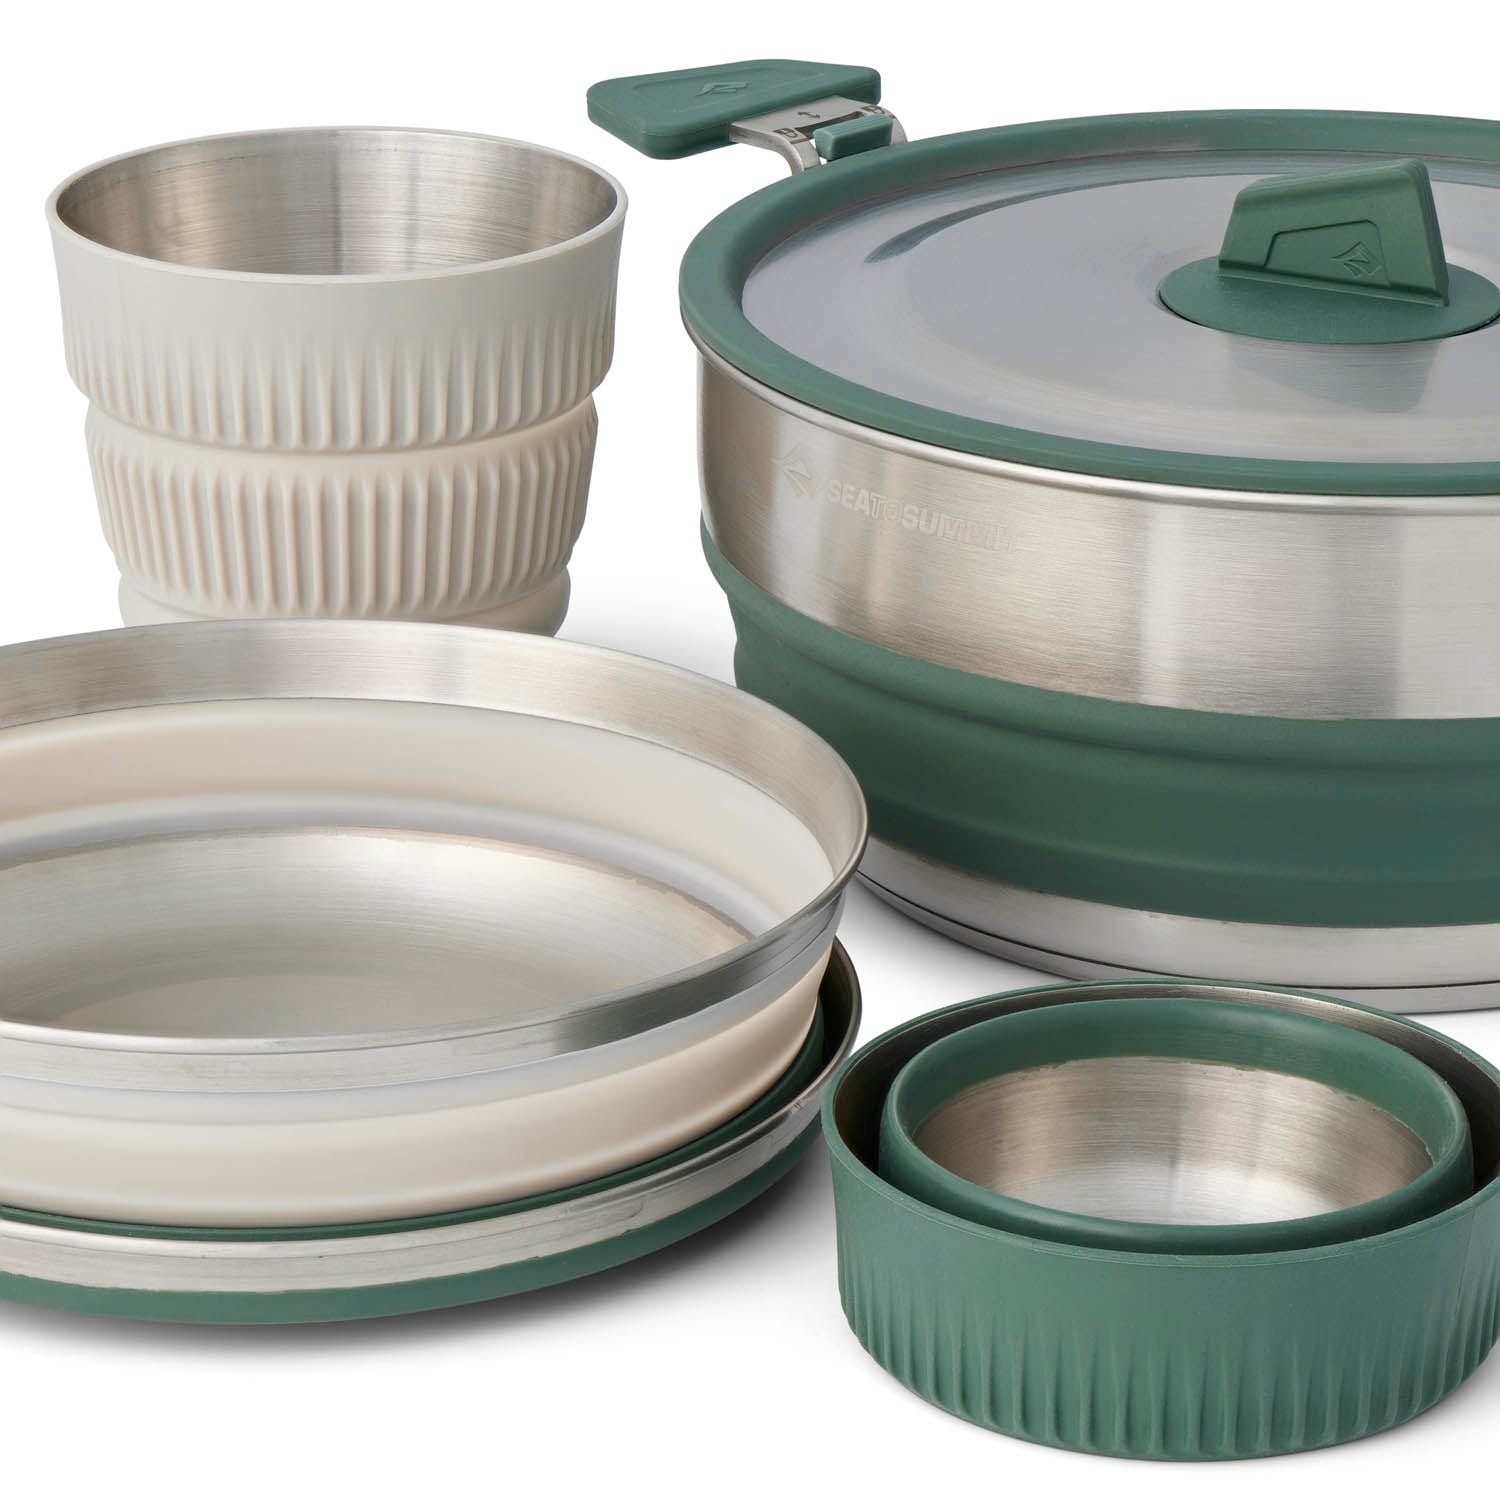 Detour Stainless Steel One Pot Cook Set - (5 Piece)